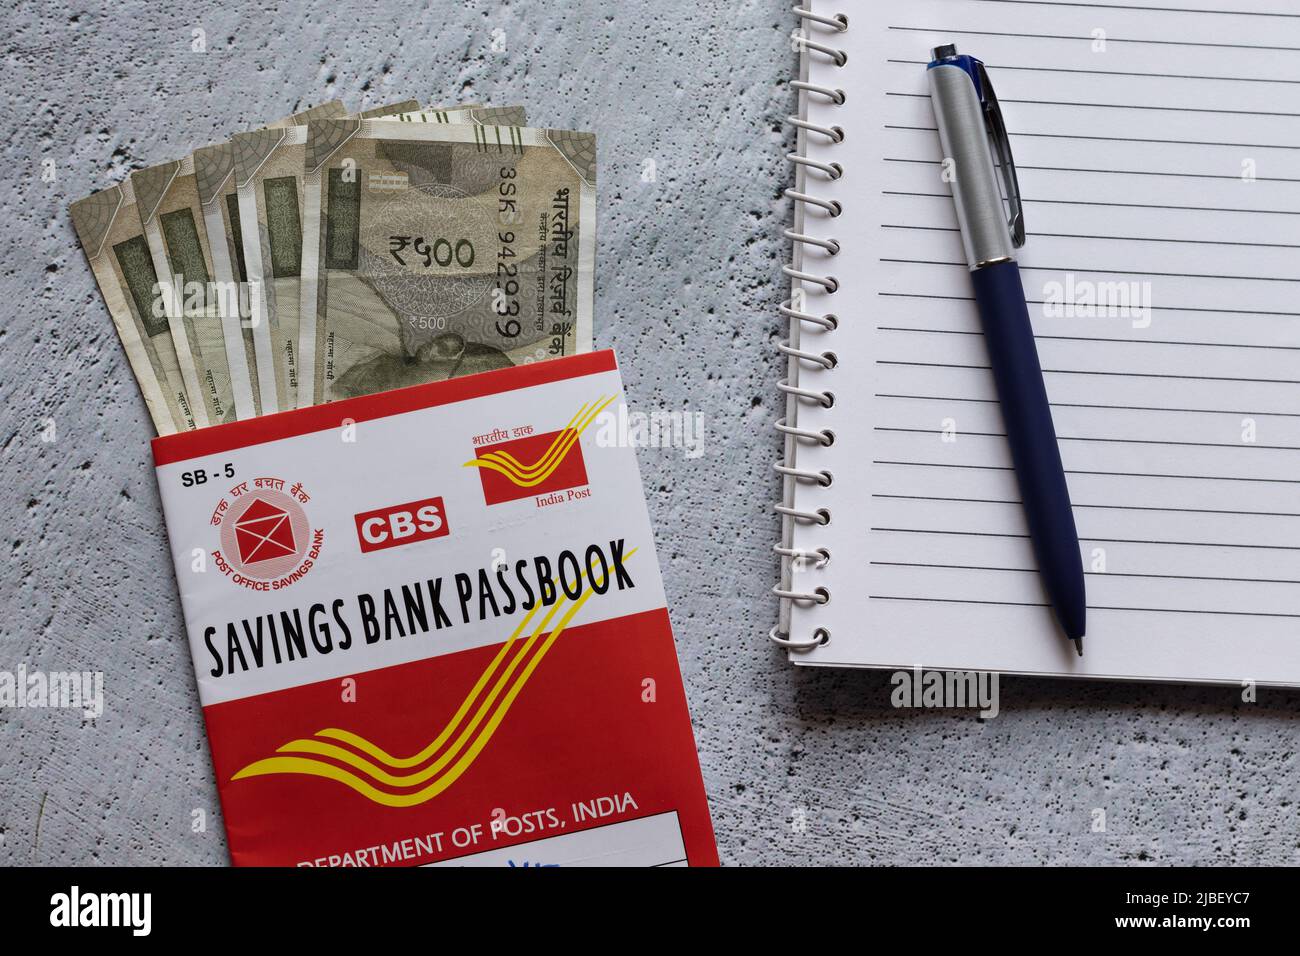 Birbhum, West Bengal, India - 25 April 2022: Top view of Indian post office savings books, currencies, pen and note book Stock Photo